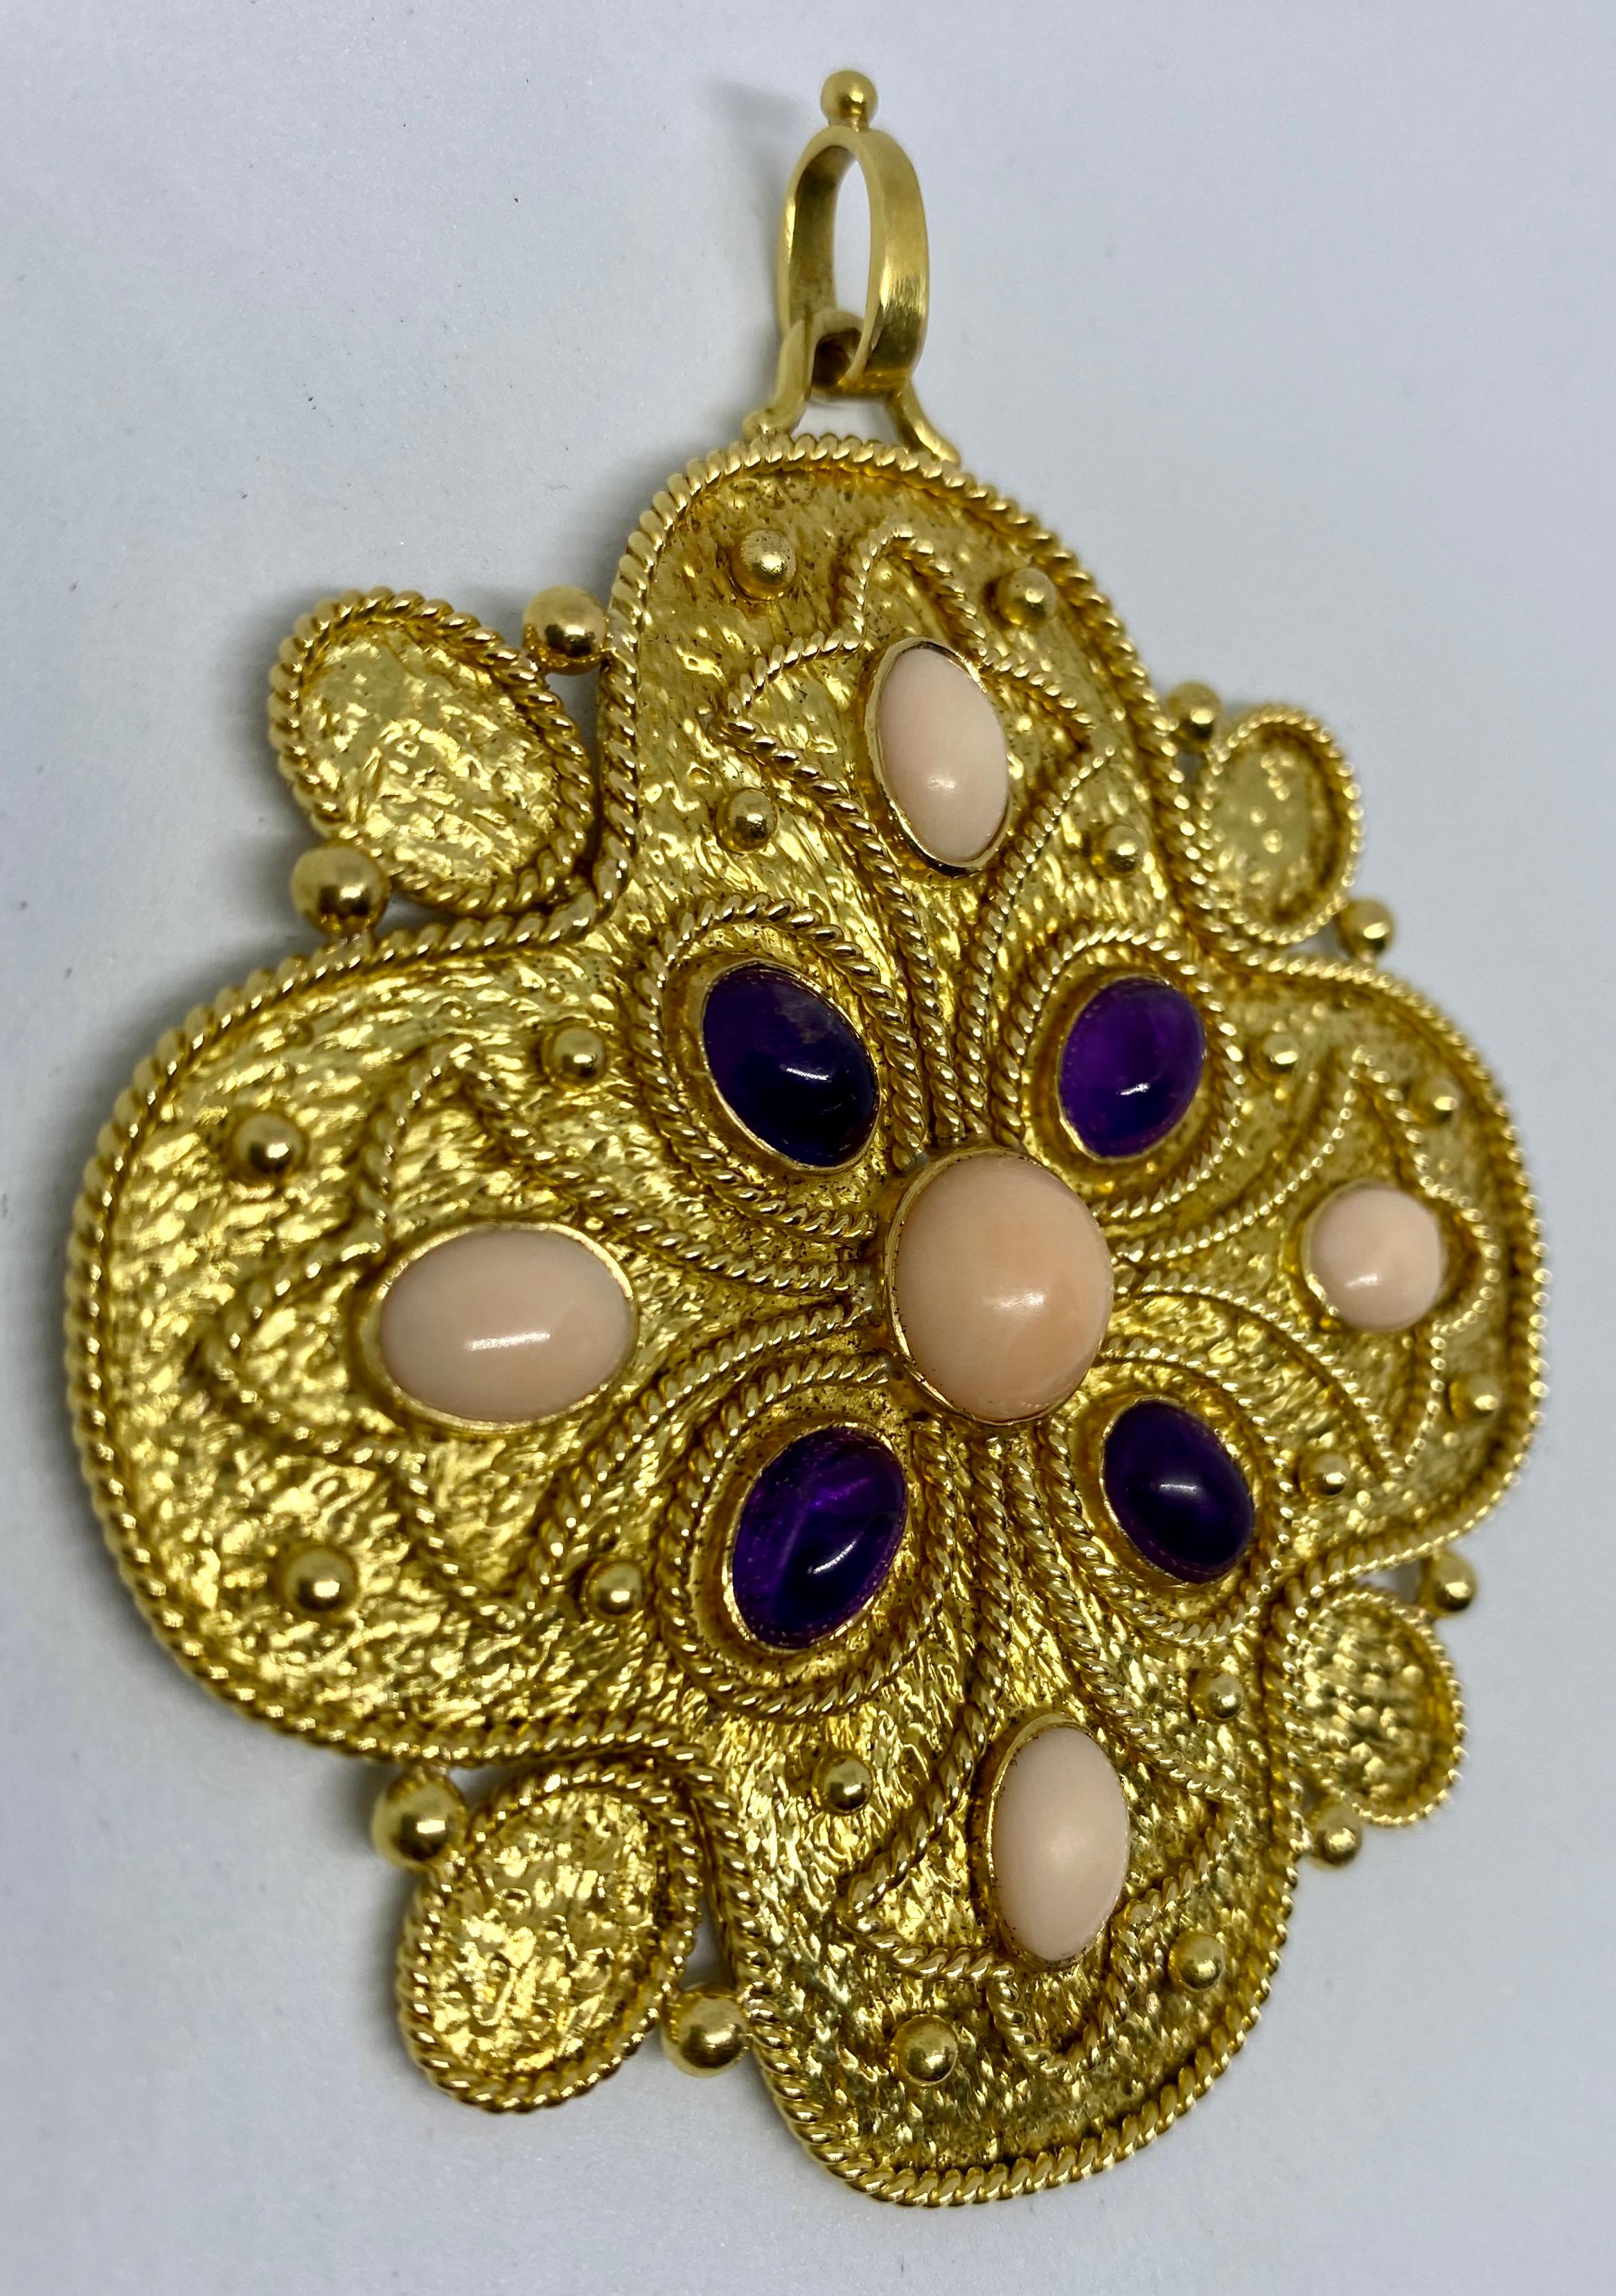 A breathtaking pendant in hammered 18K yellow gold featuring amethyst and angel skin coral cabochons and rope details.

Pieces from this era by Vourakis, one of the 